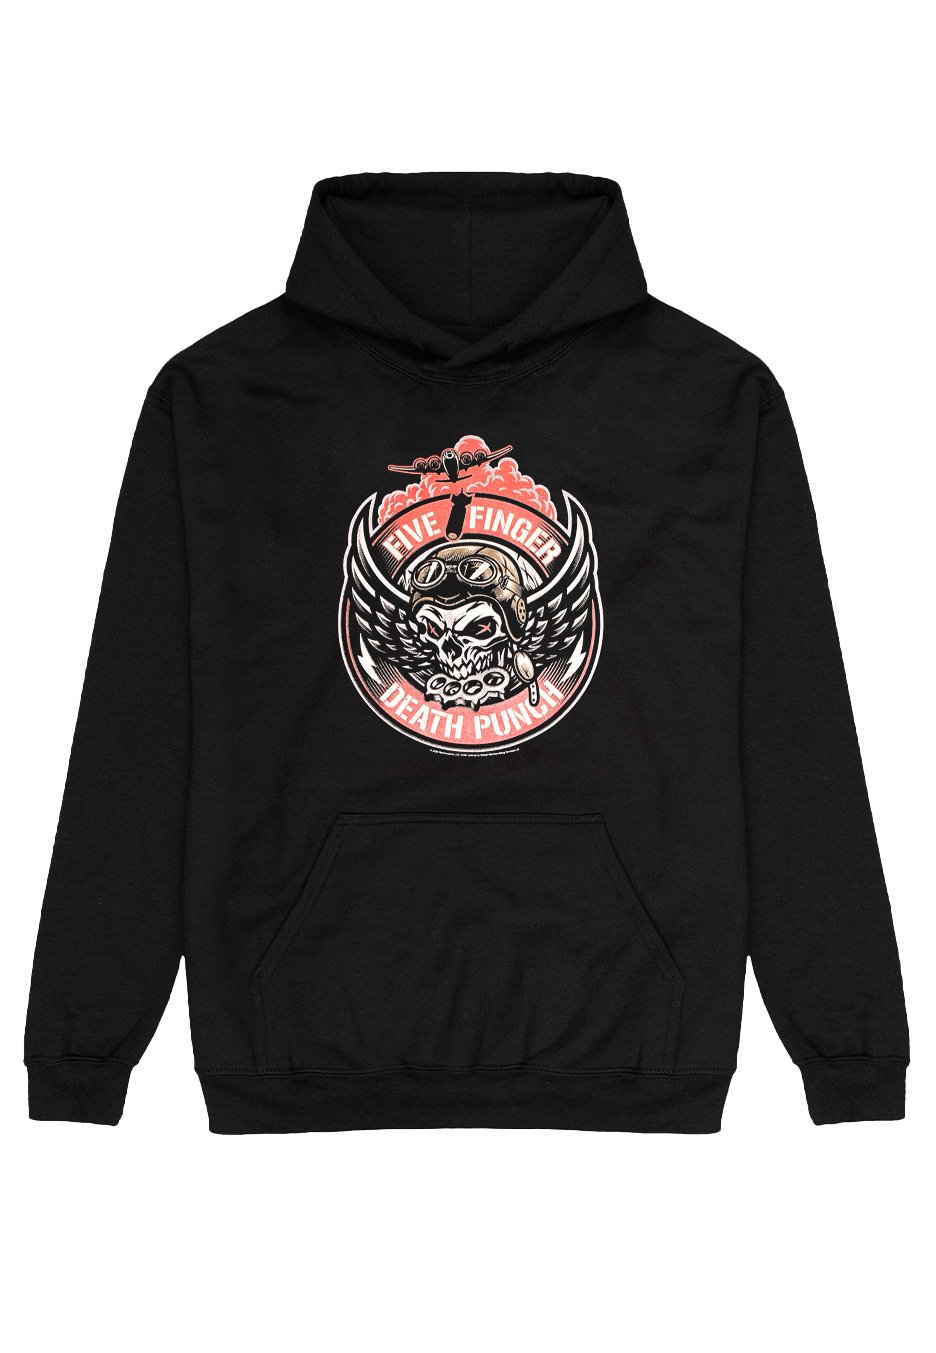 Five Finger Death Punch - Bomber Patch - Hoodie